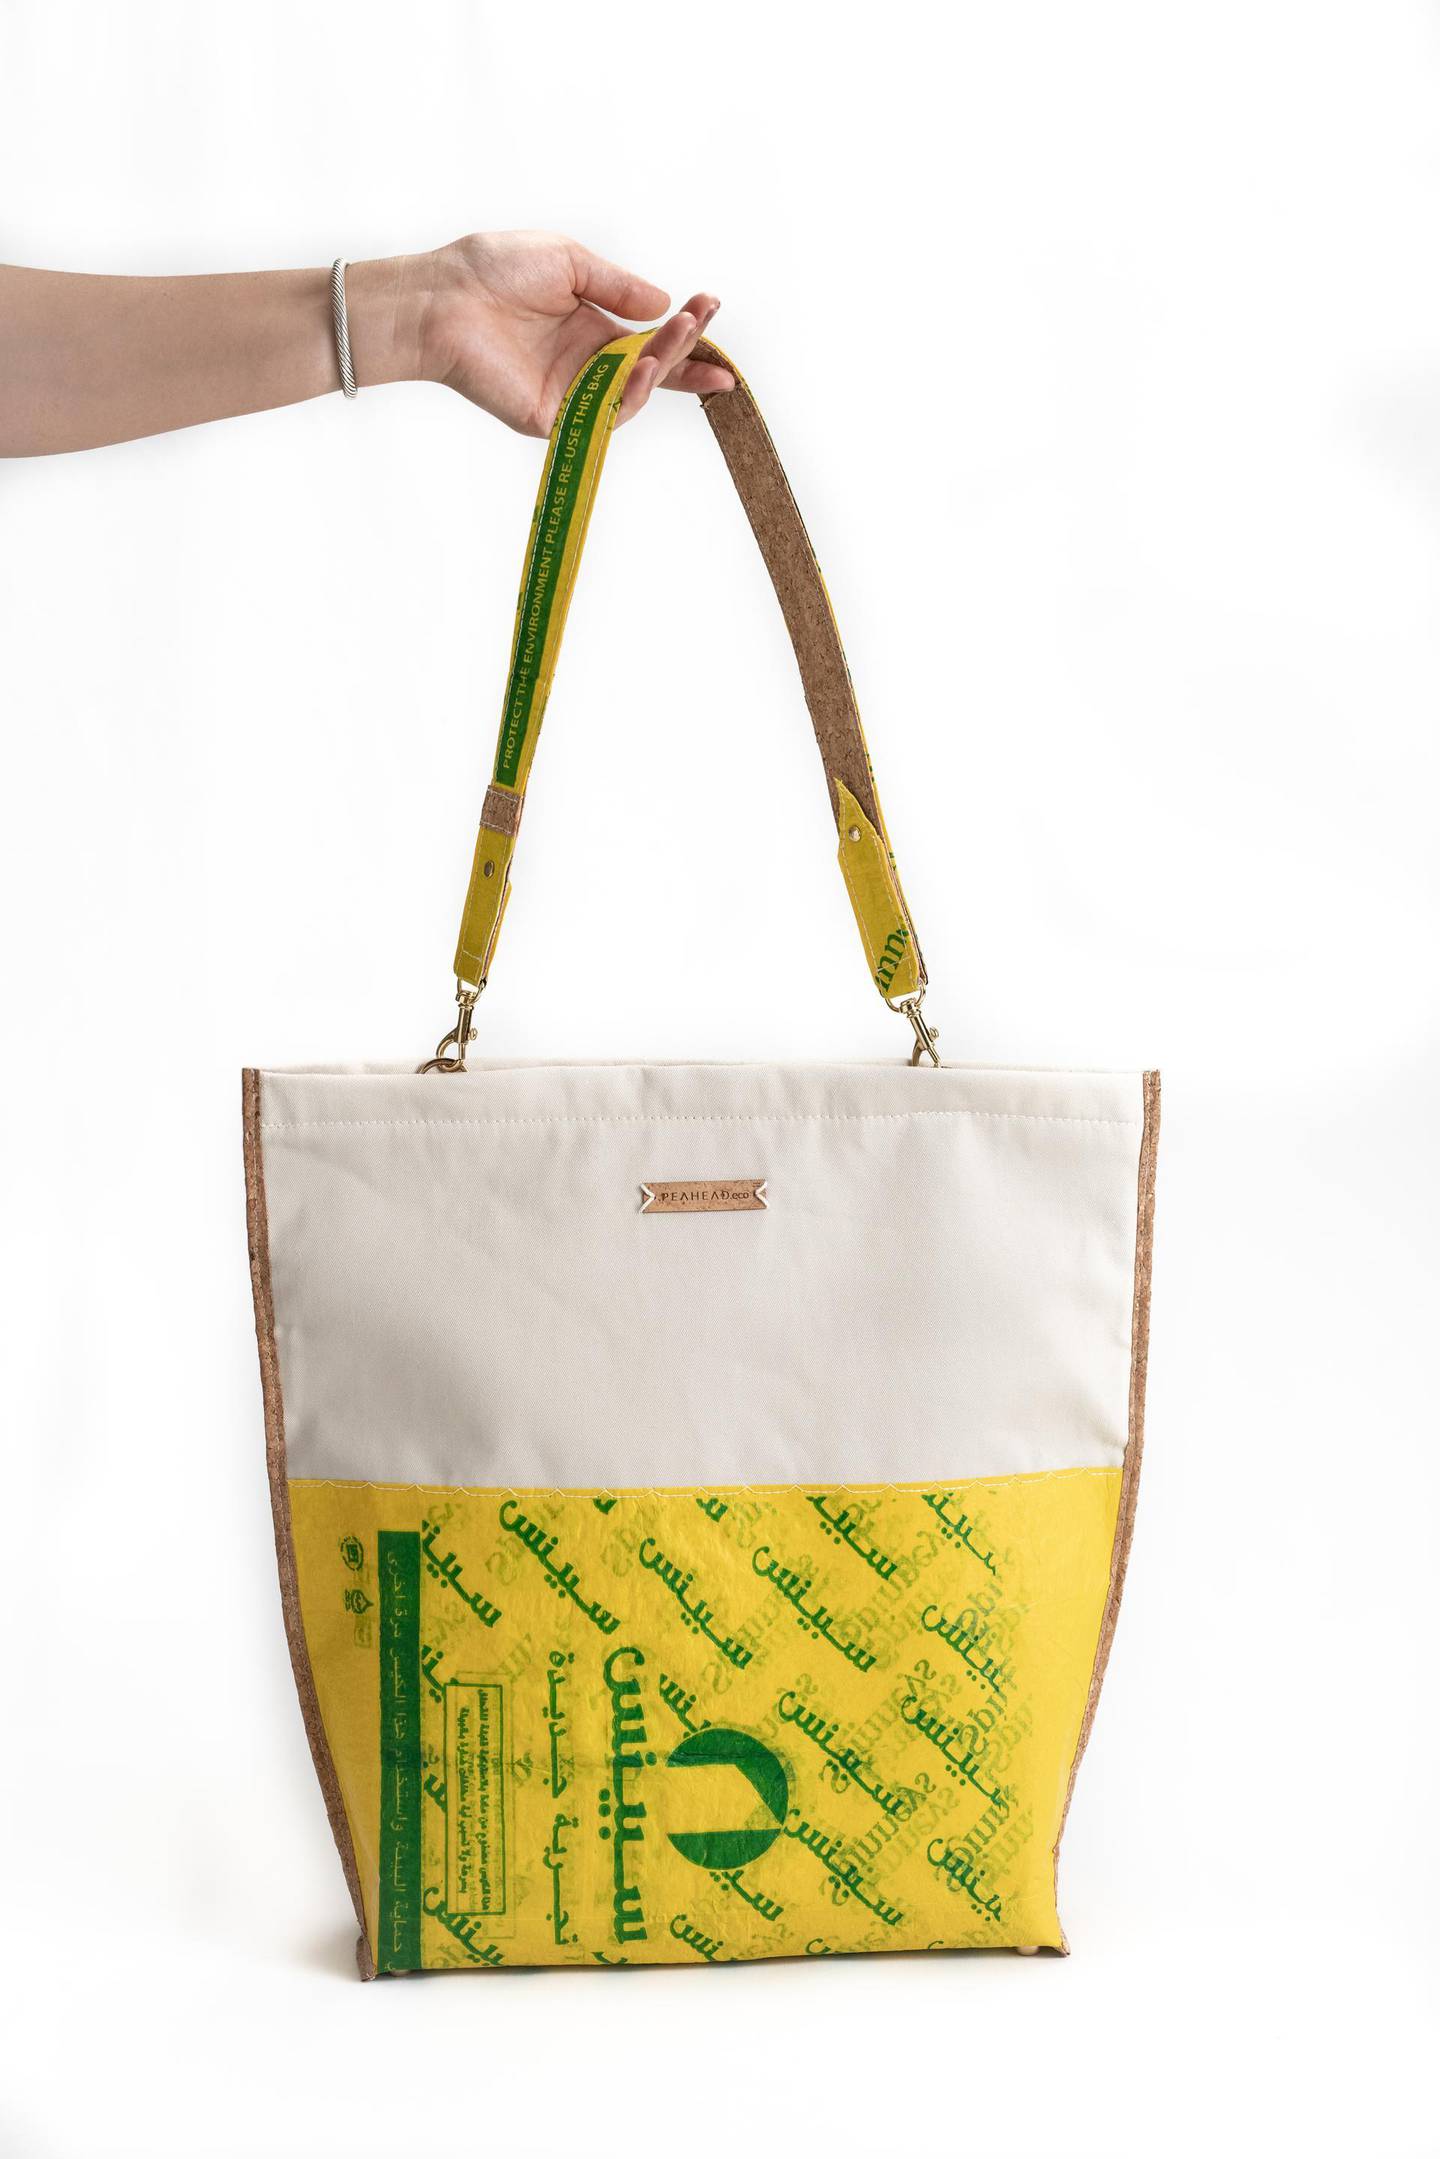 Peahead.eco's Curtain Call totes are made from upcycled curtains and used plastic bags. Ian D Murphy